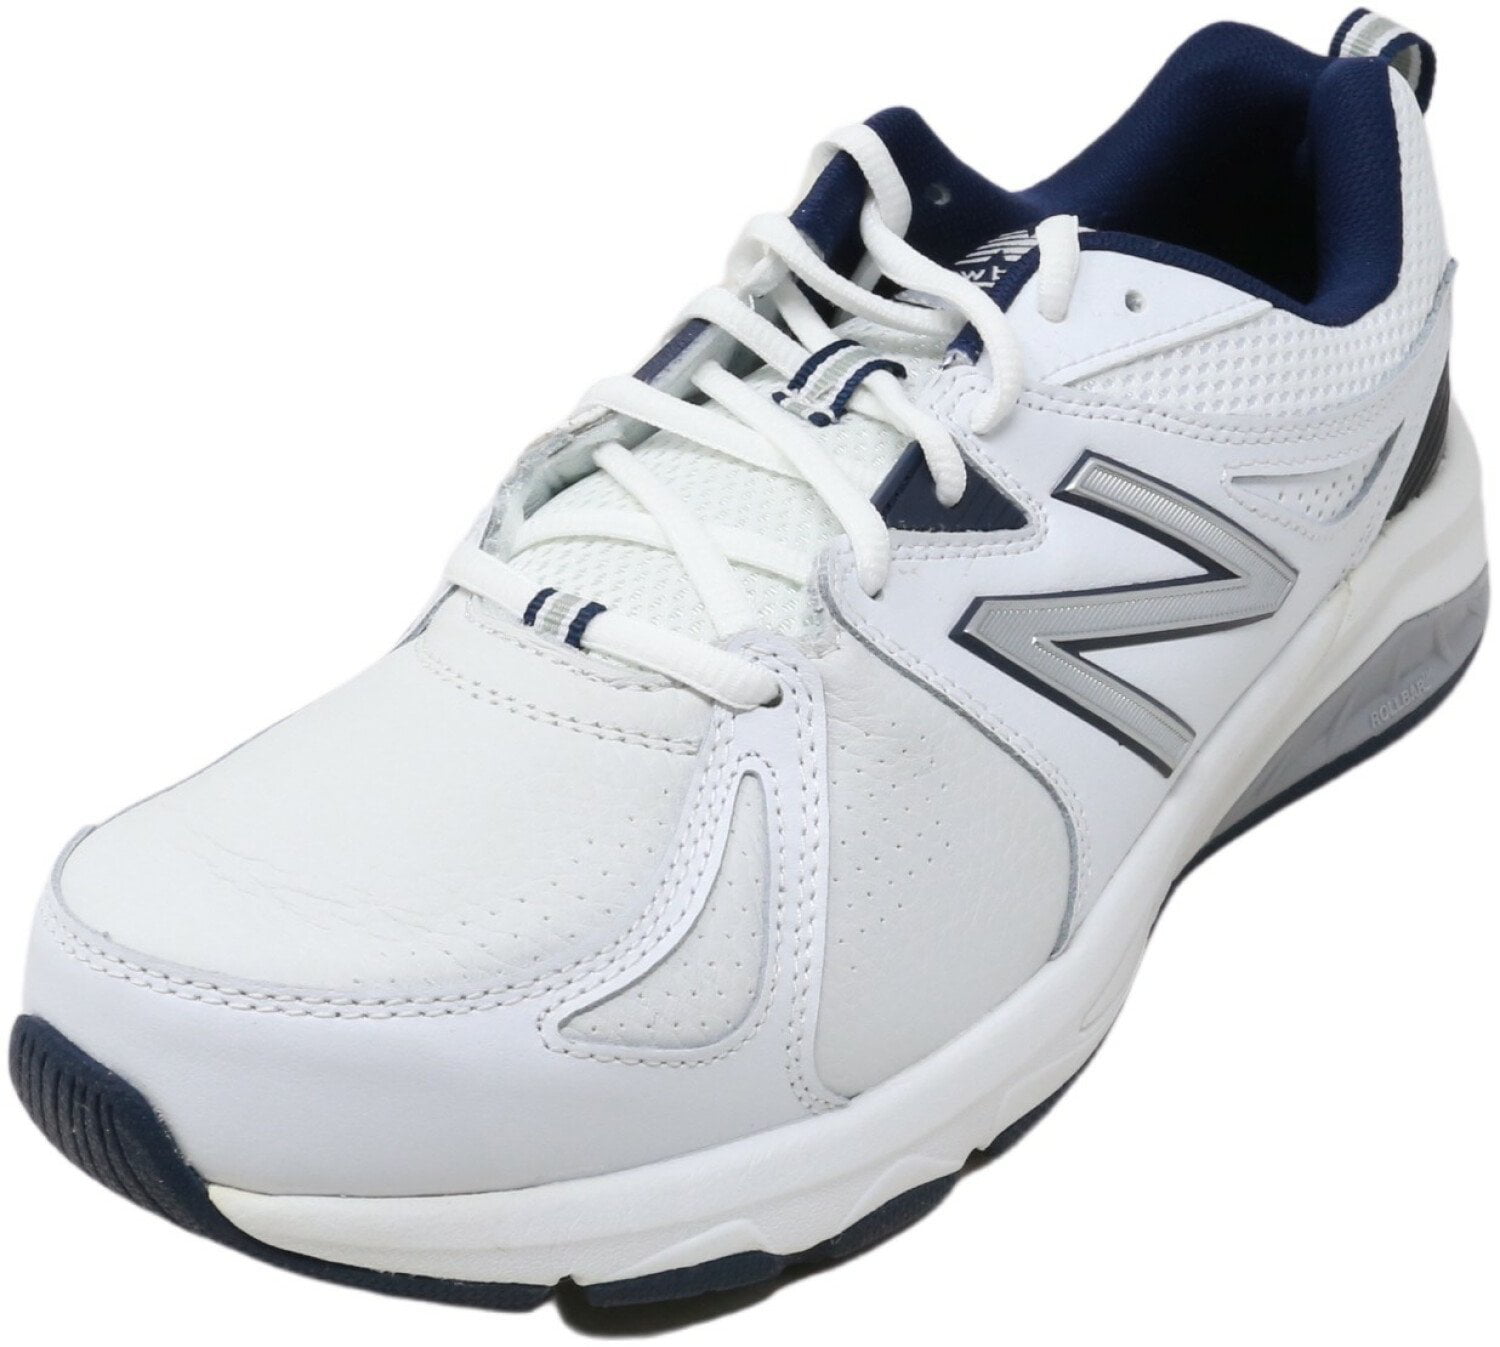 leather cross training shoes